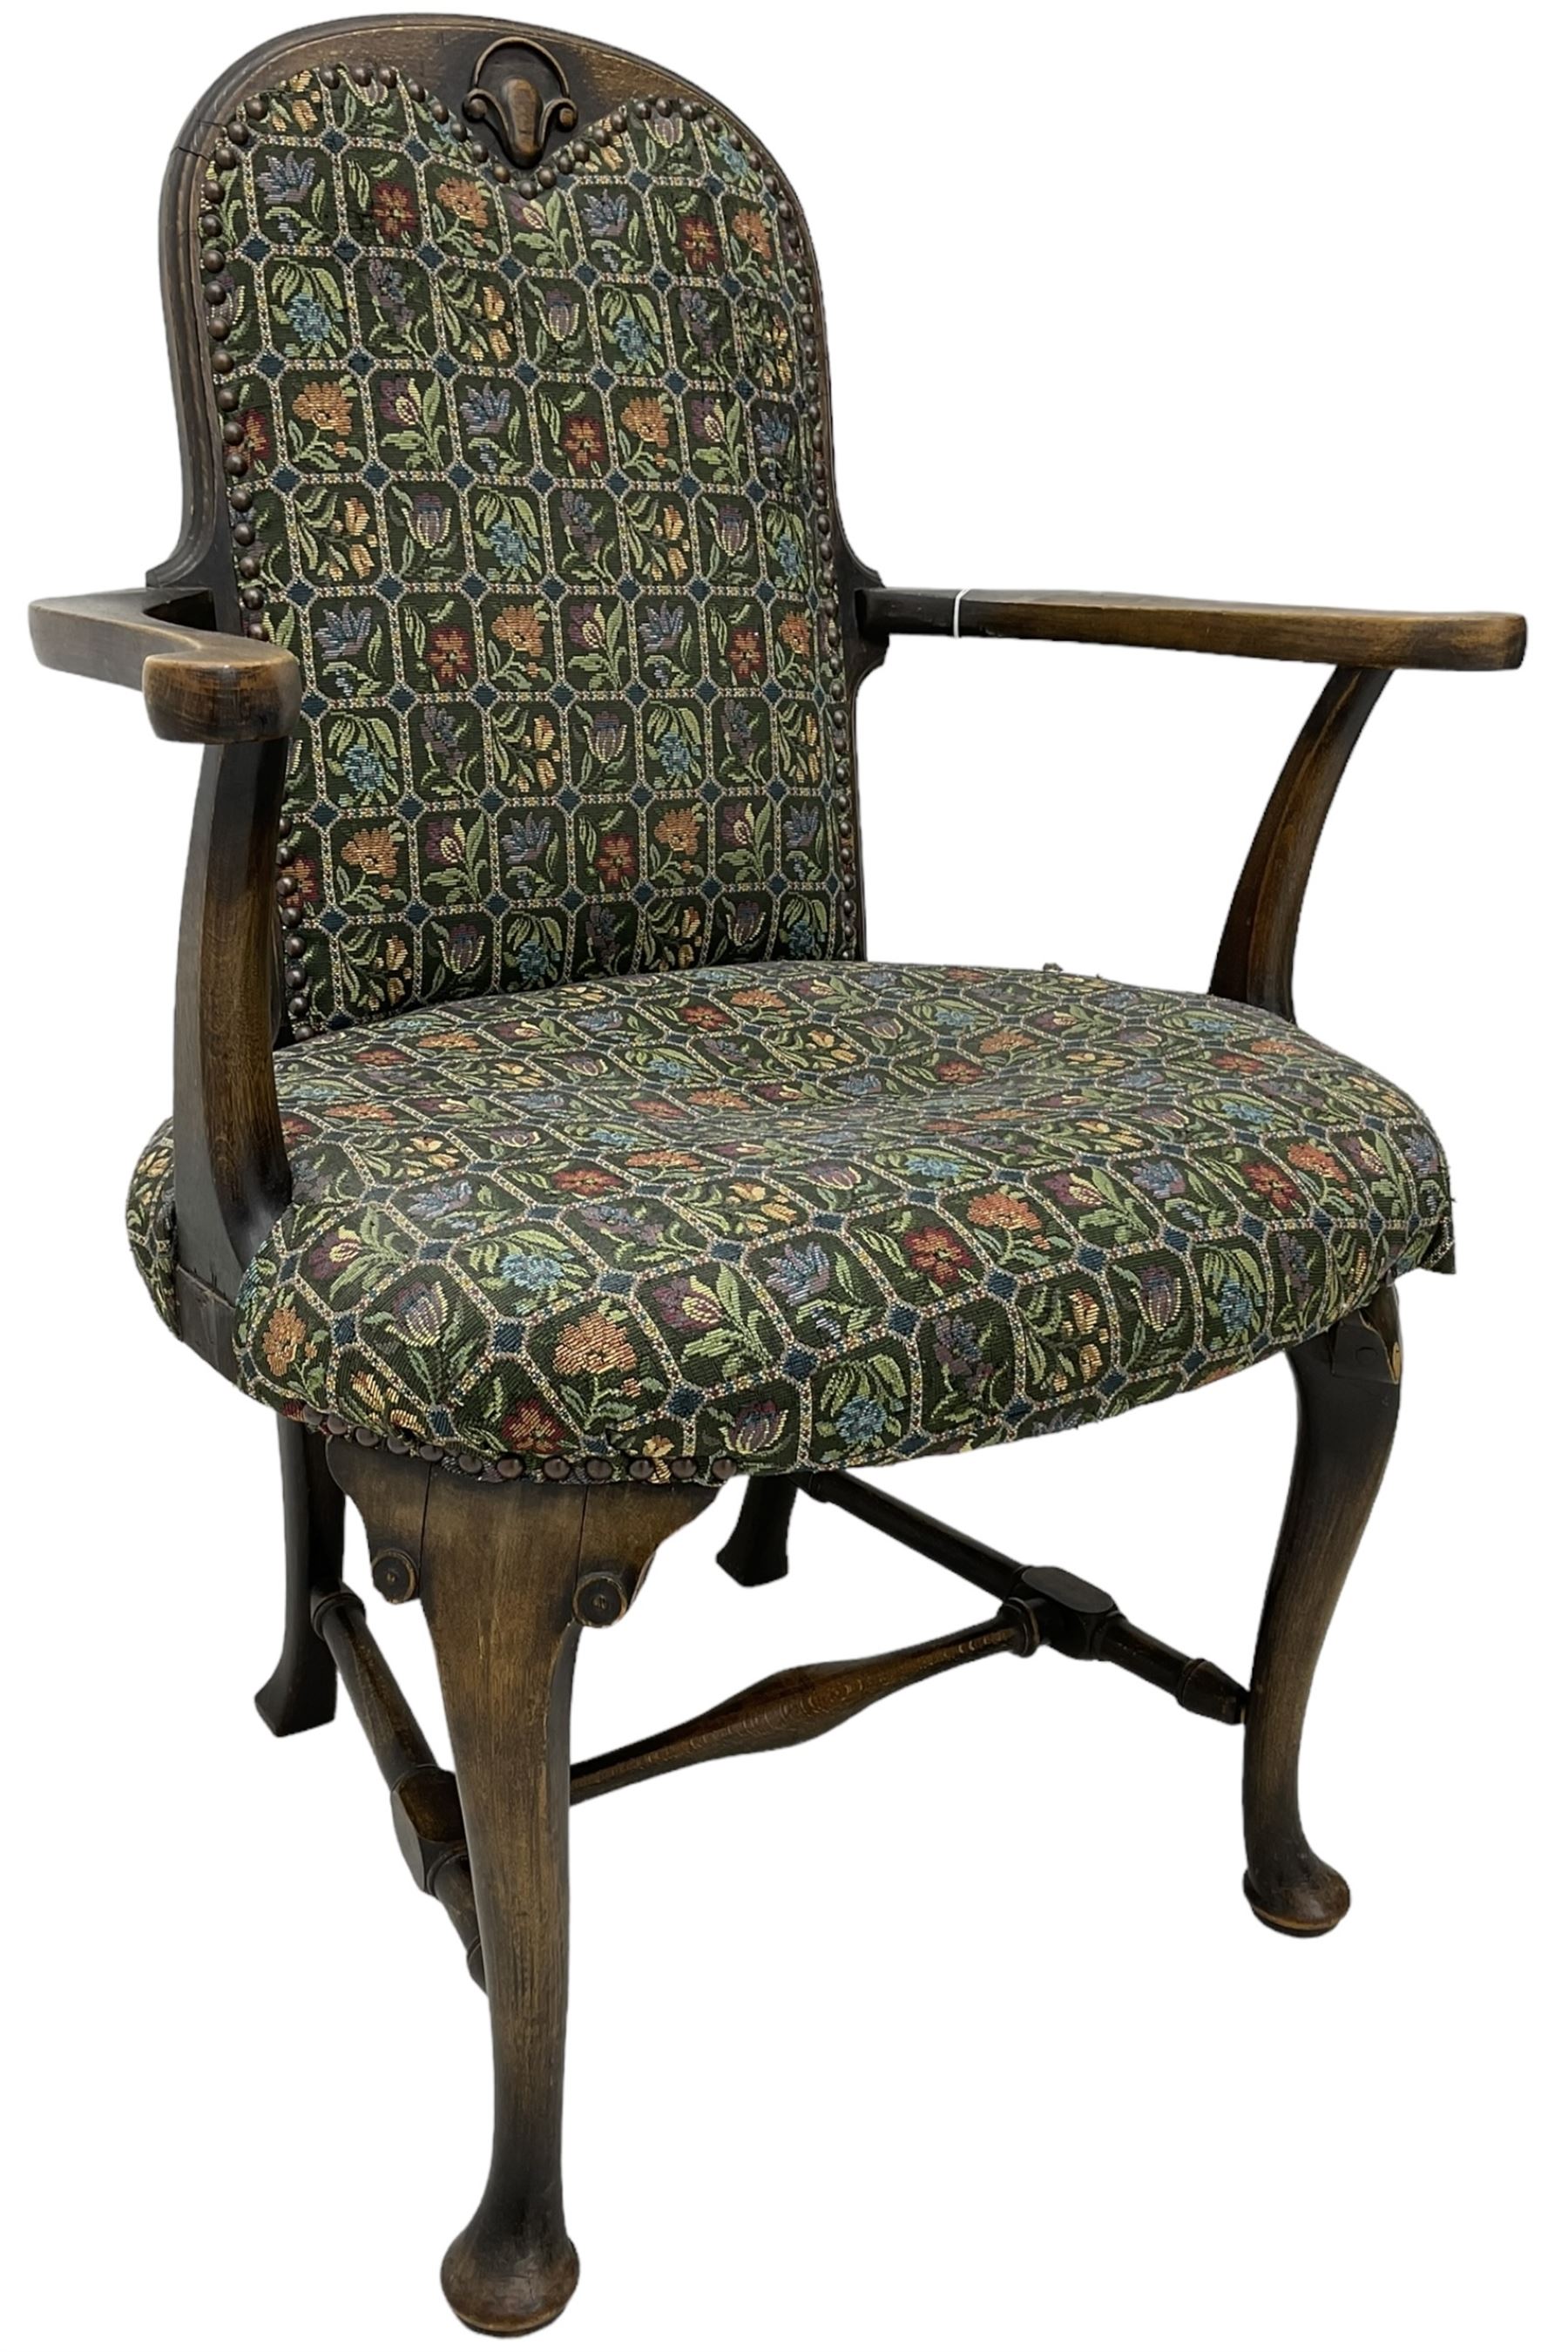 Early 20th century Queen Anne design beech framed armchair - Image 6 of 6